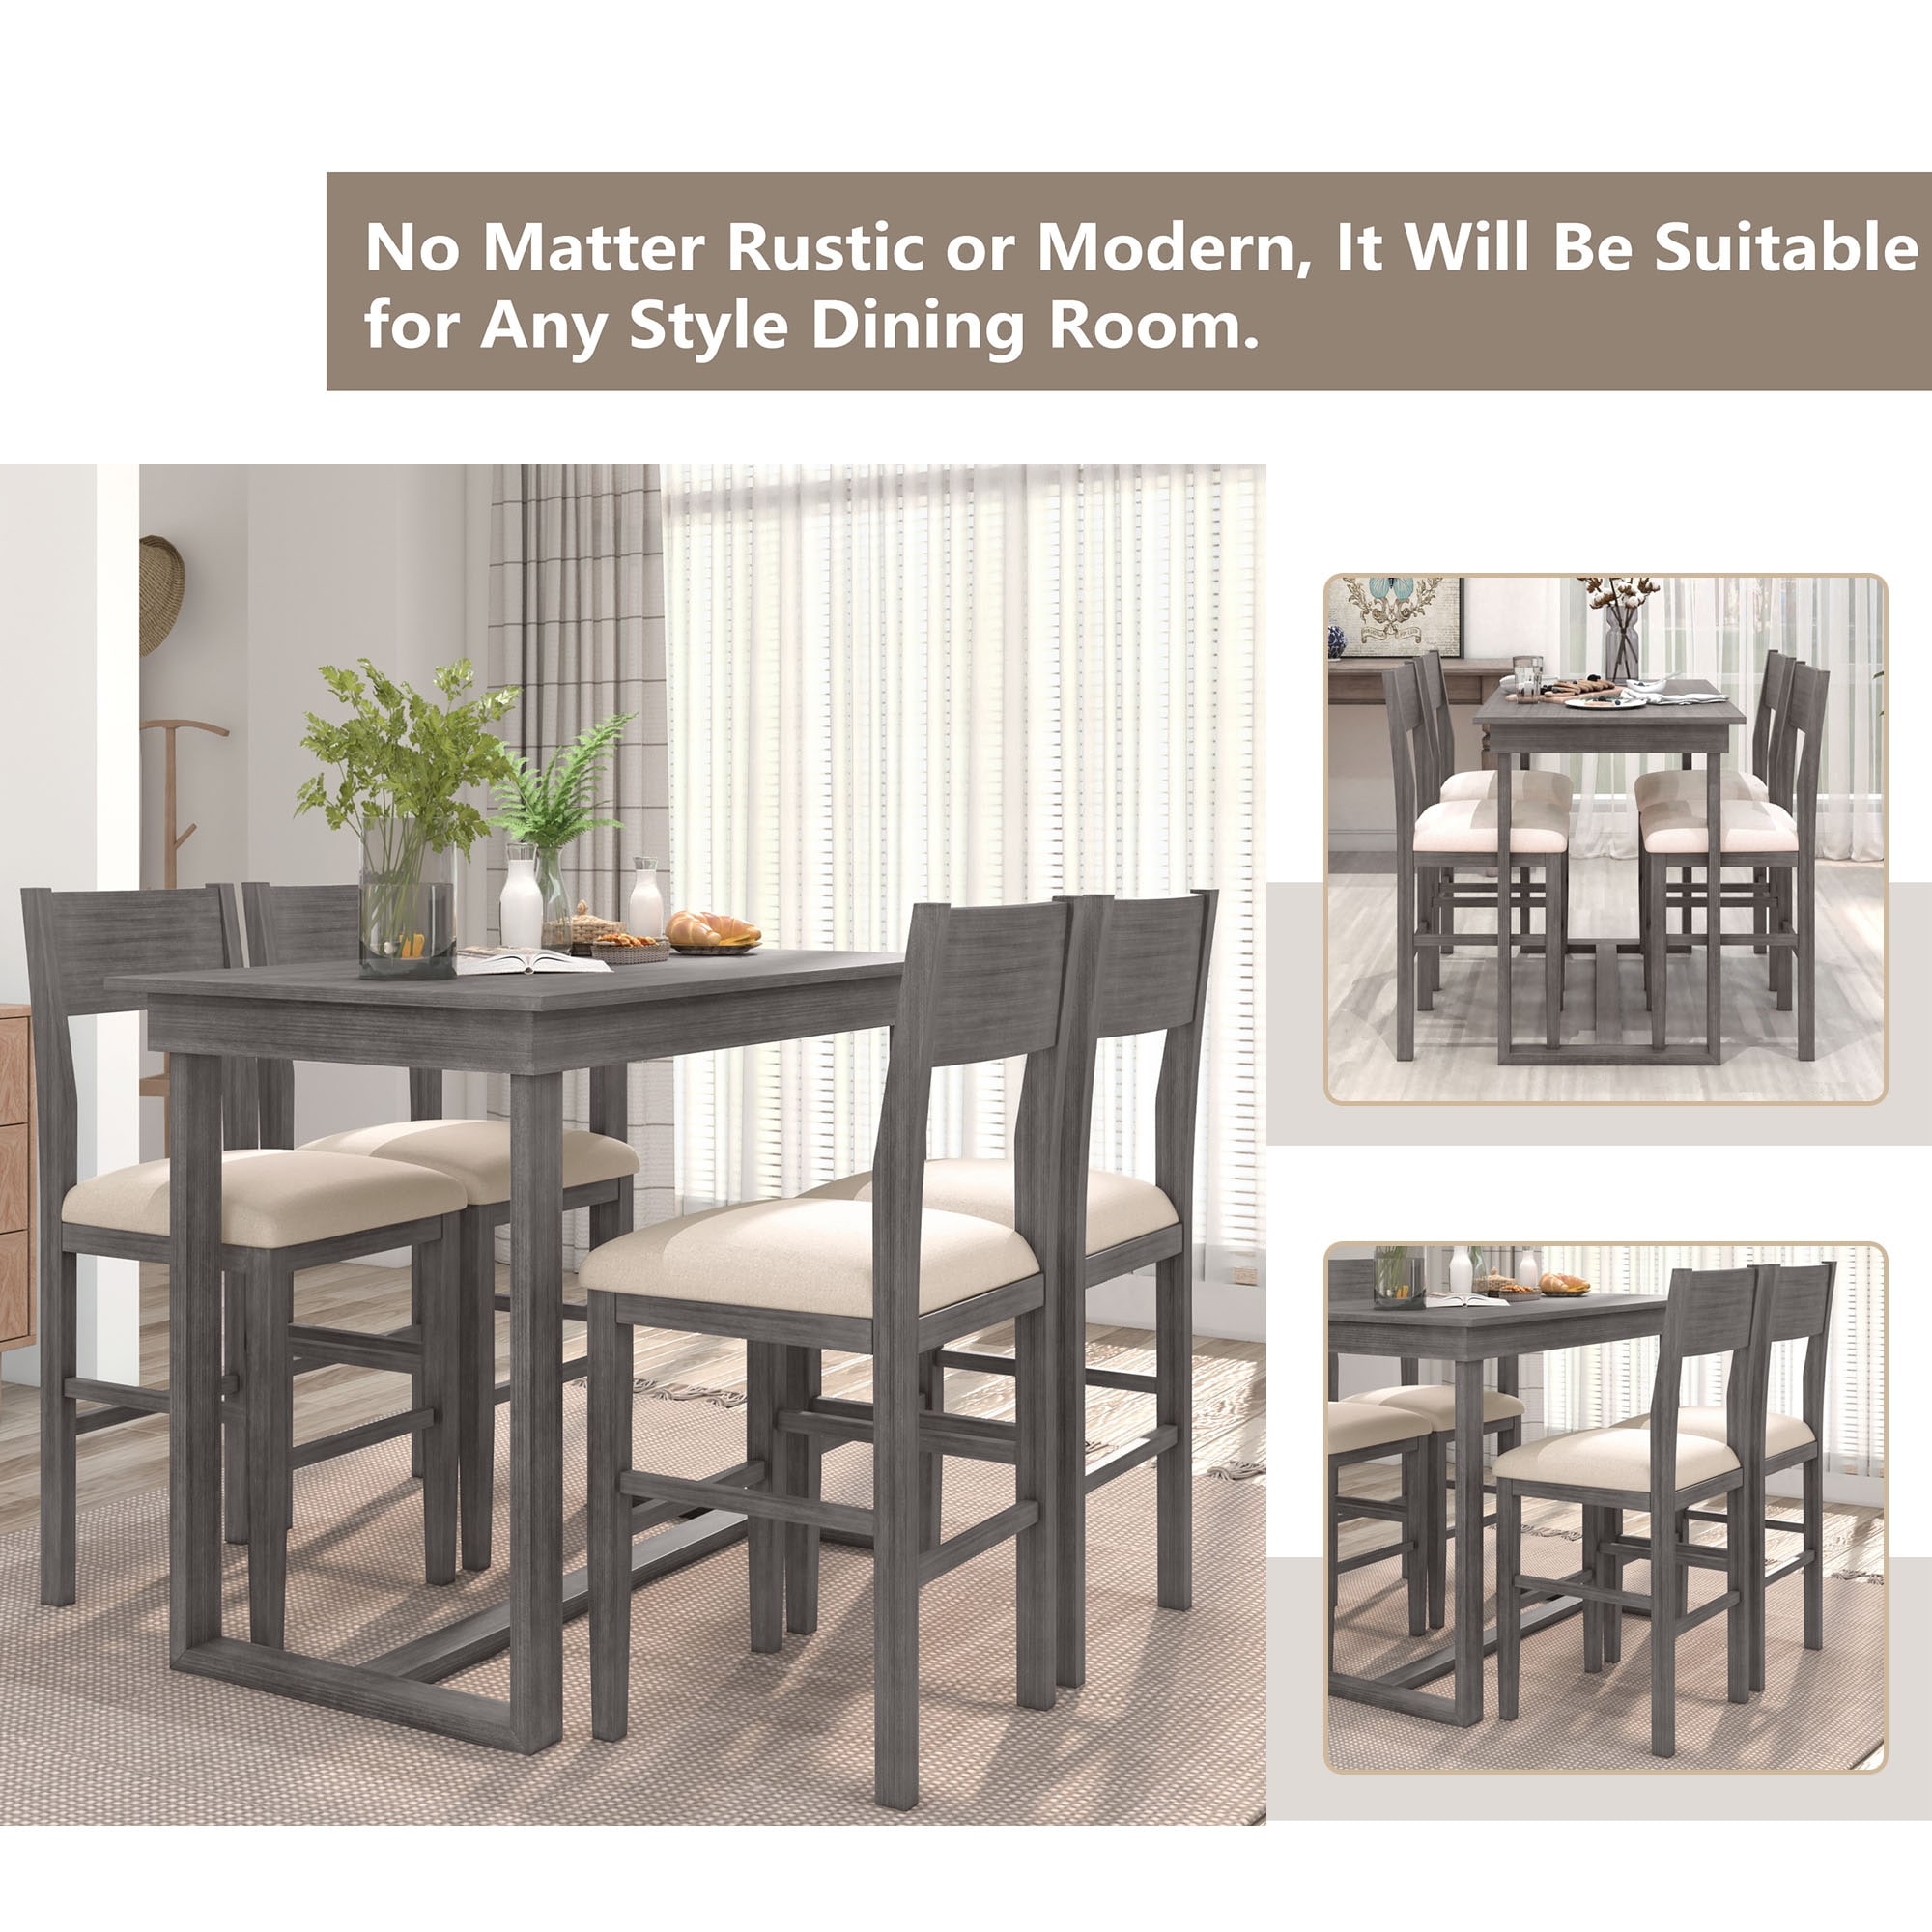 https://ak1.ostkcdn.com/images/products/is/images/direct/8c452f14002bb25c6115f20d4129558008369a69/Rectangular-5-Piece-Wood-Fixed-Dining-Table-Set-with-Linen-Fabric-Chairs-and-Wood-Dining-Table-for-Dining-Room.jpg